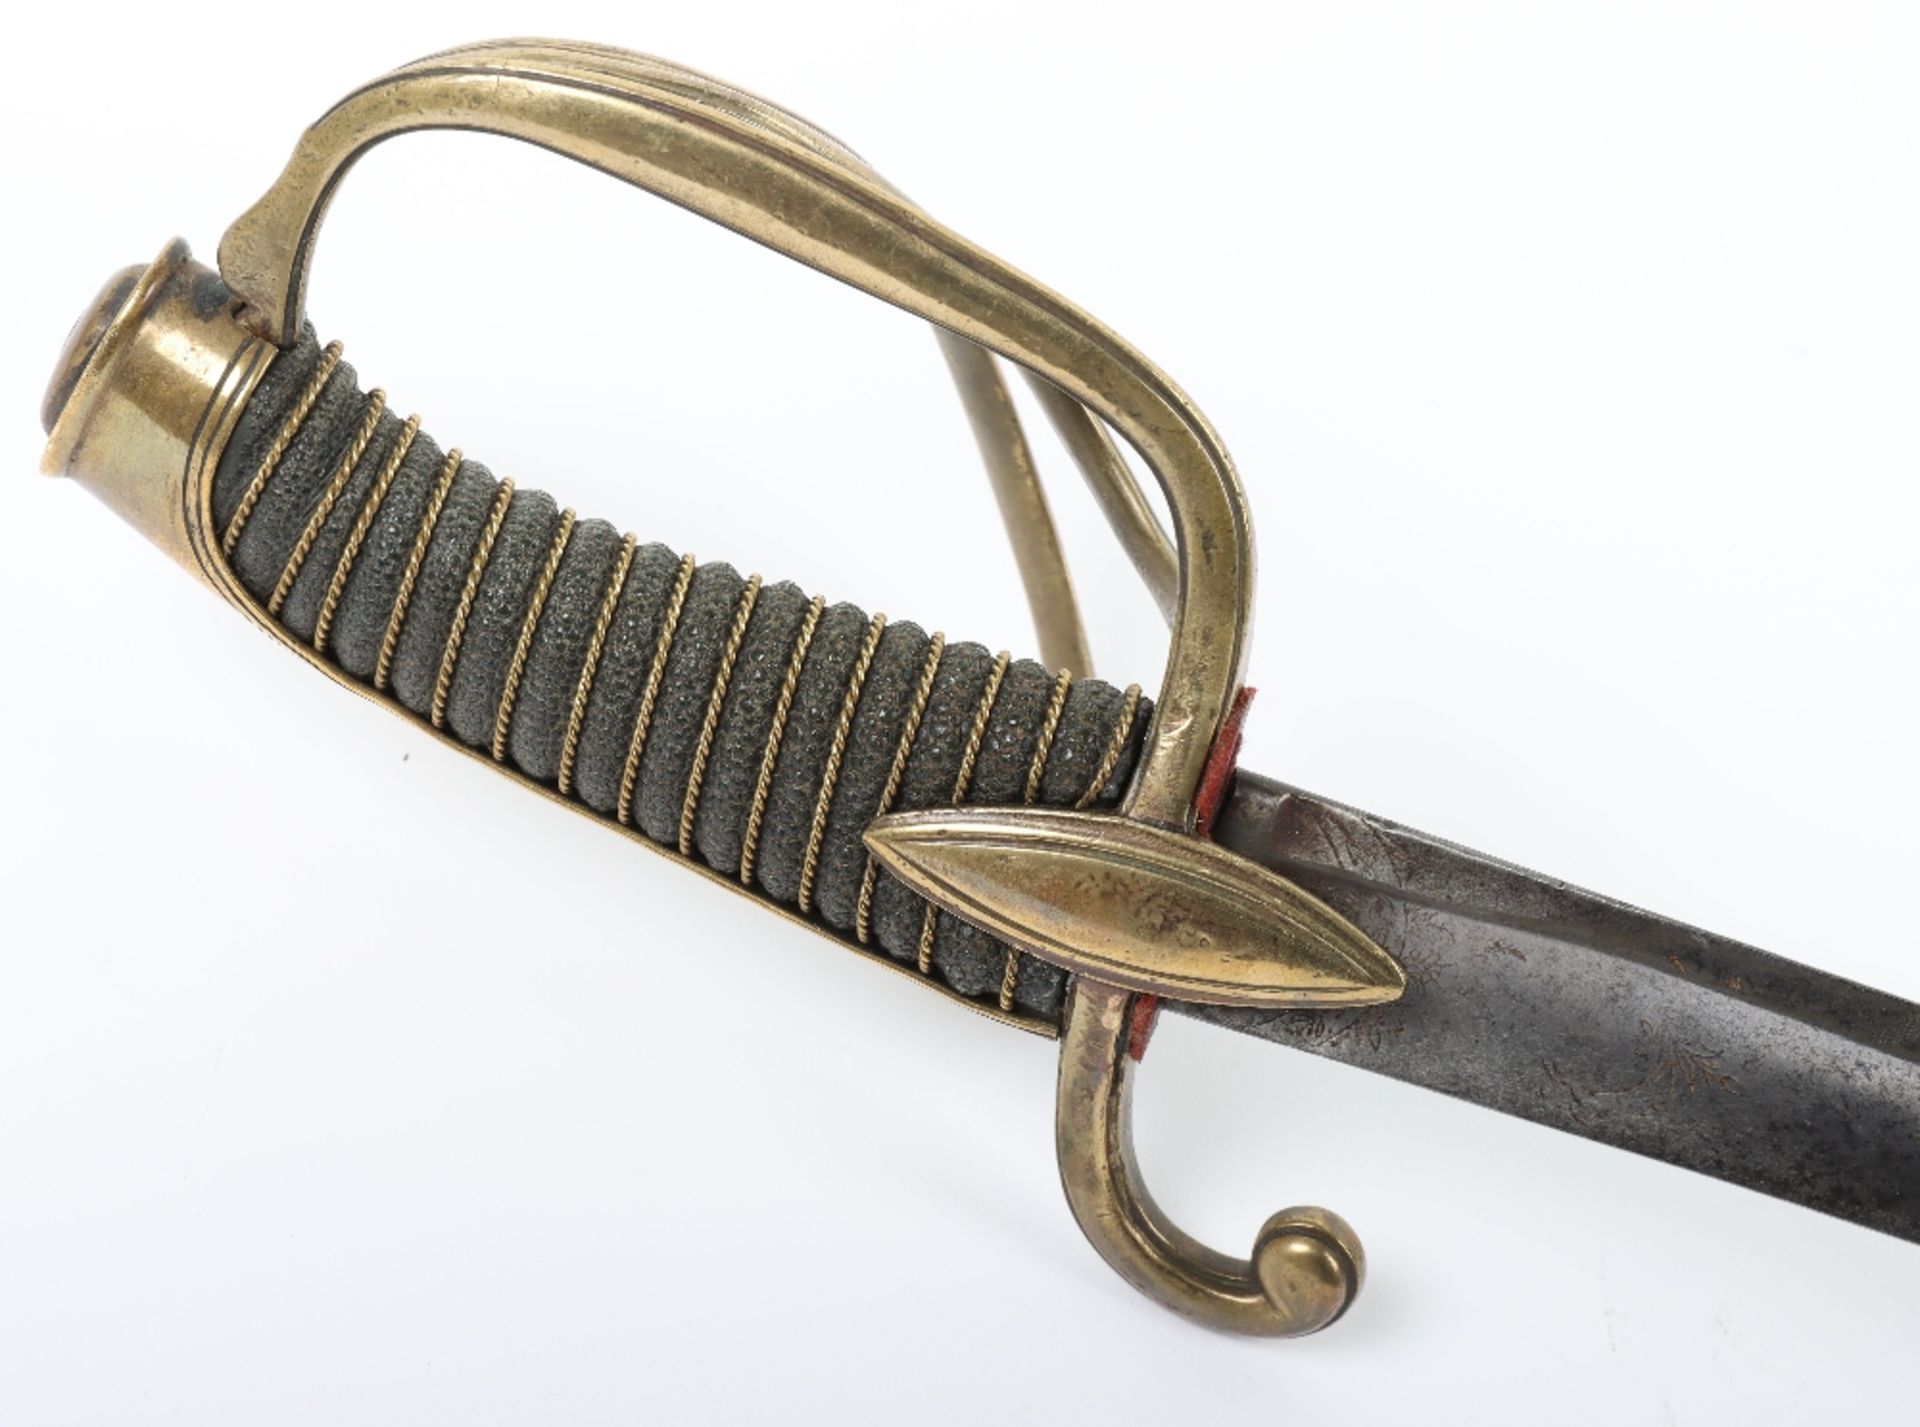 French Light Infantry Company Officers Sword - Image 5 of 10